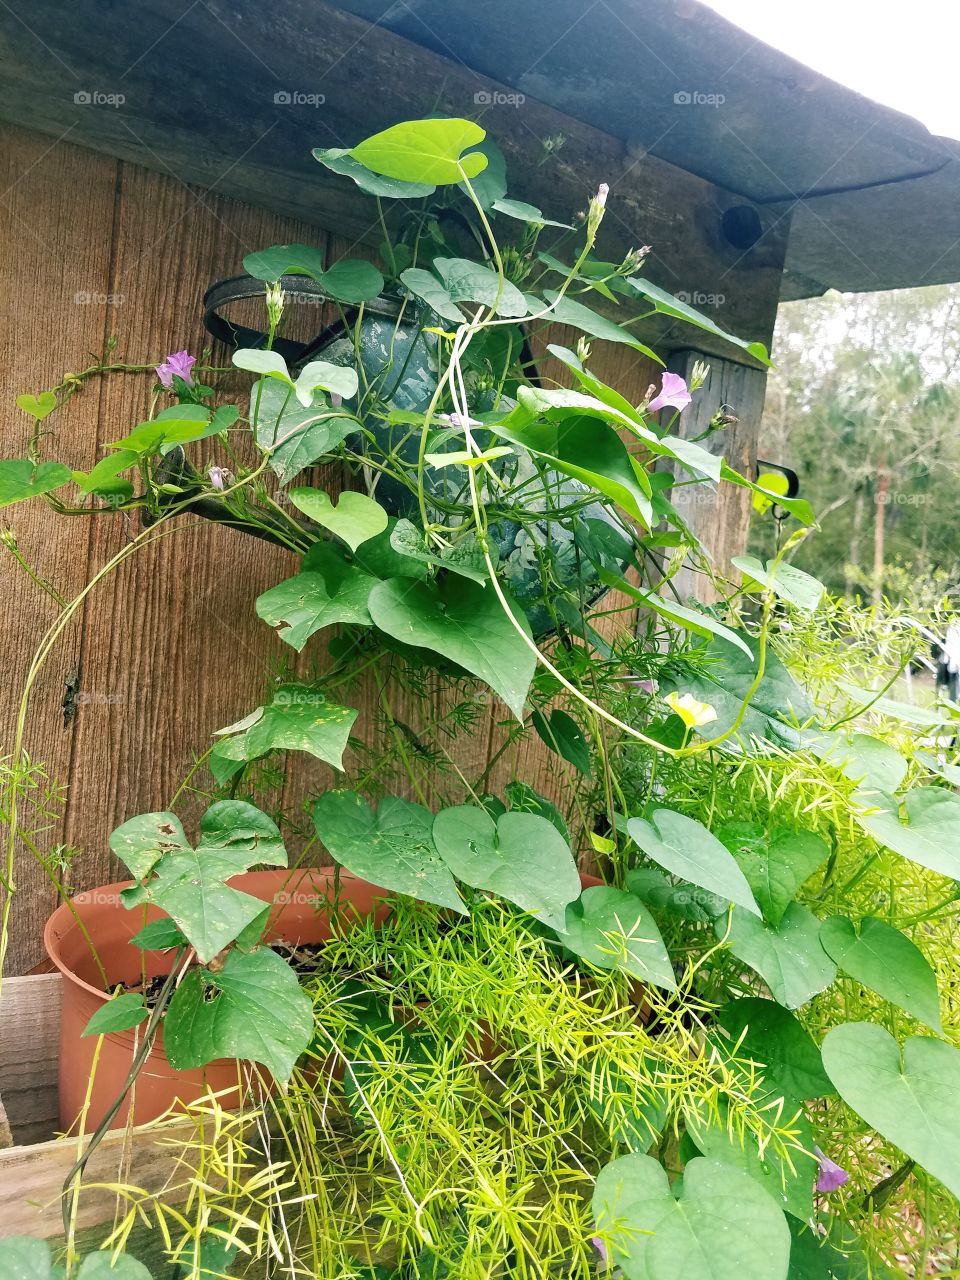 The vines growing on our garden shed.